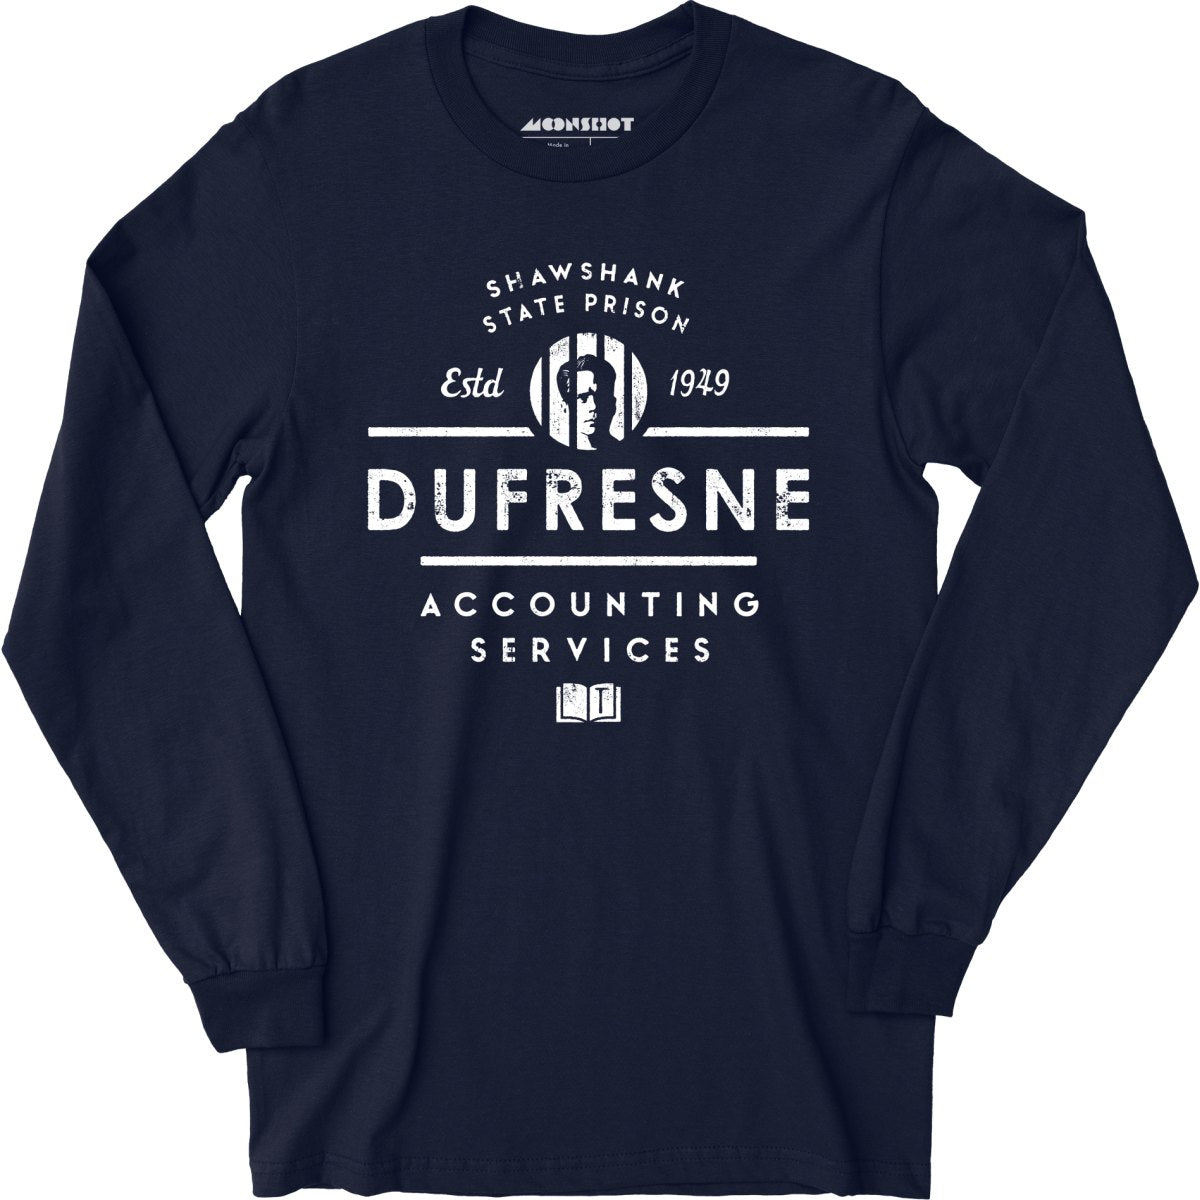 Dufresne Accounting Services - Long Sleeve T-Shirt